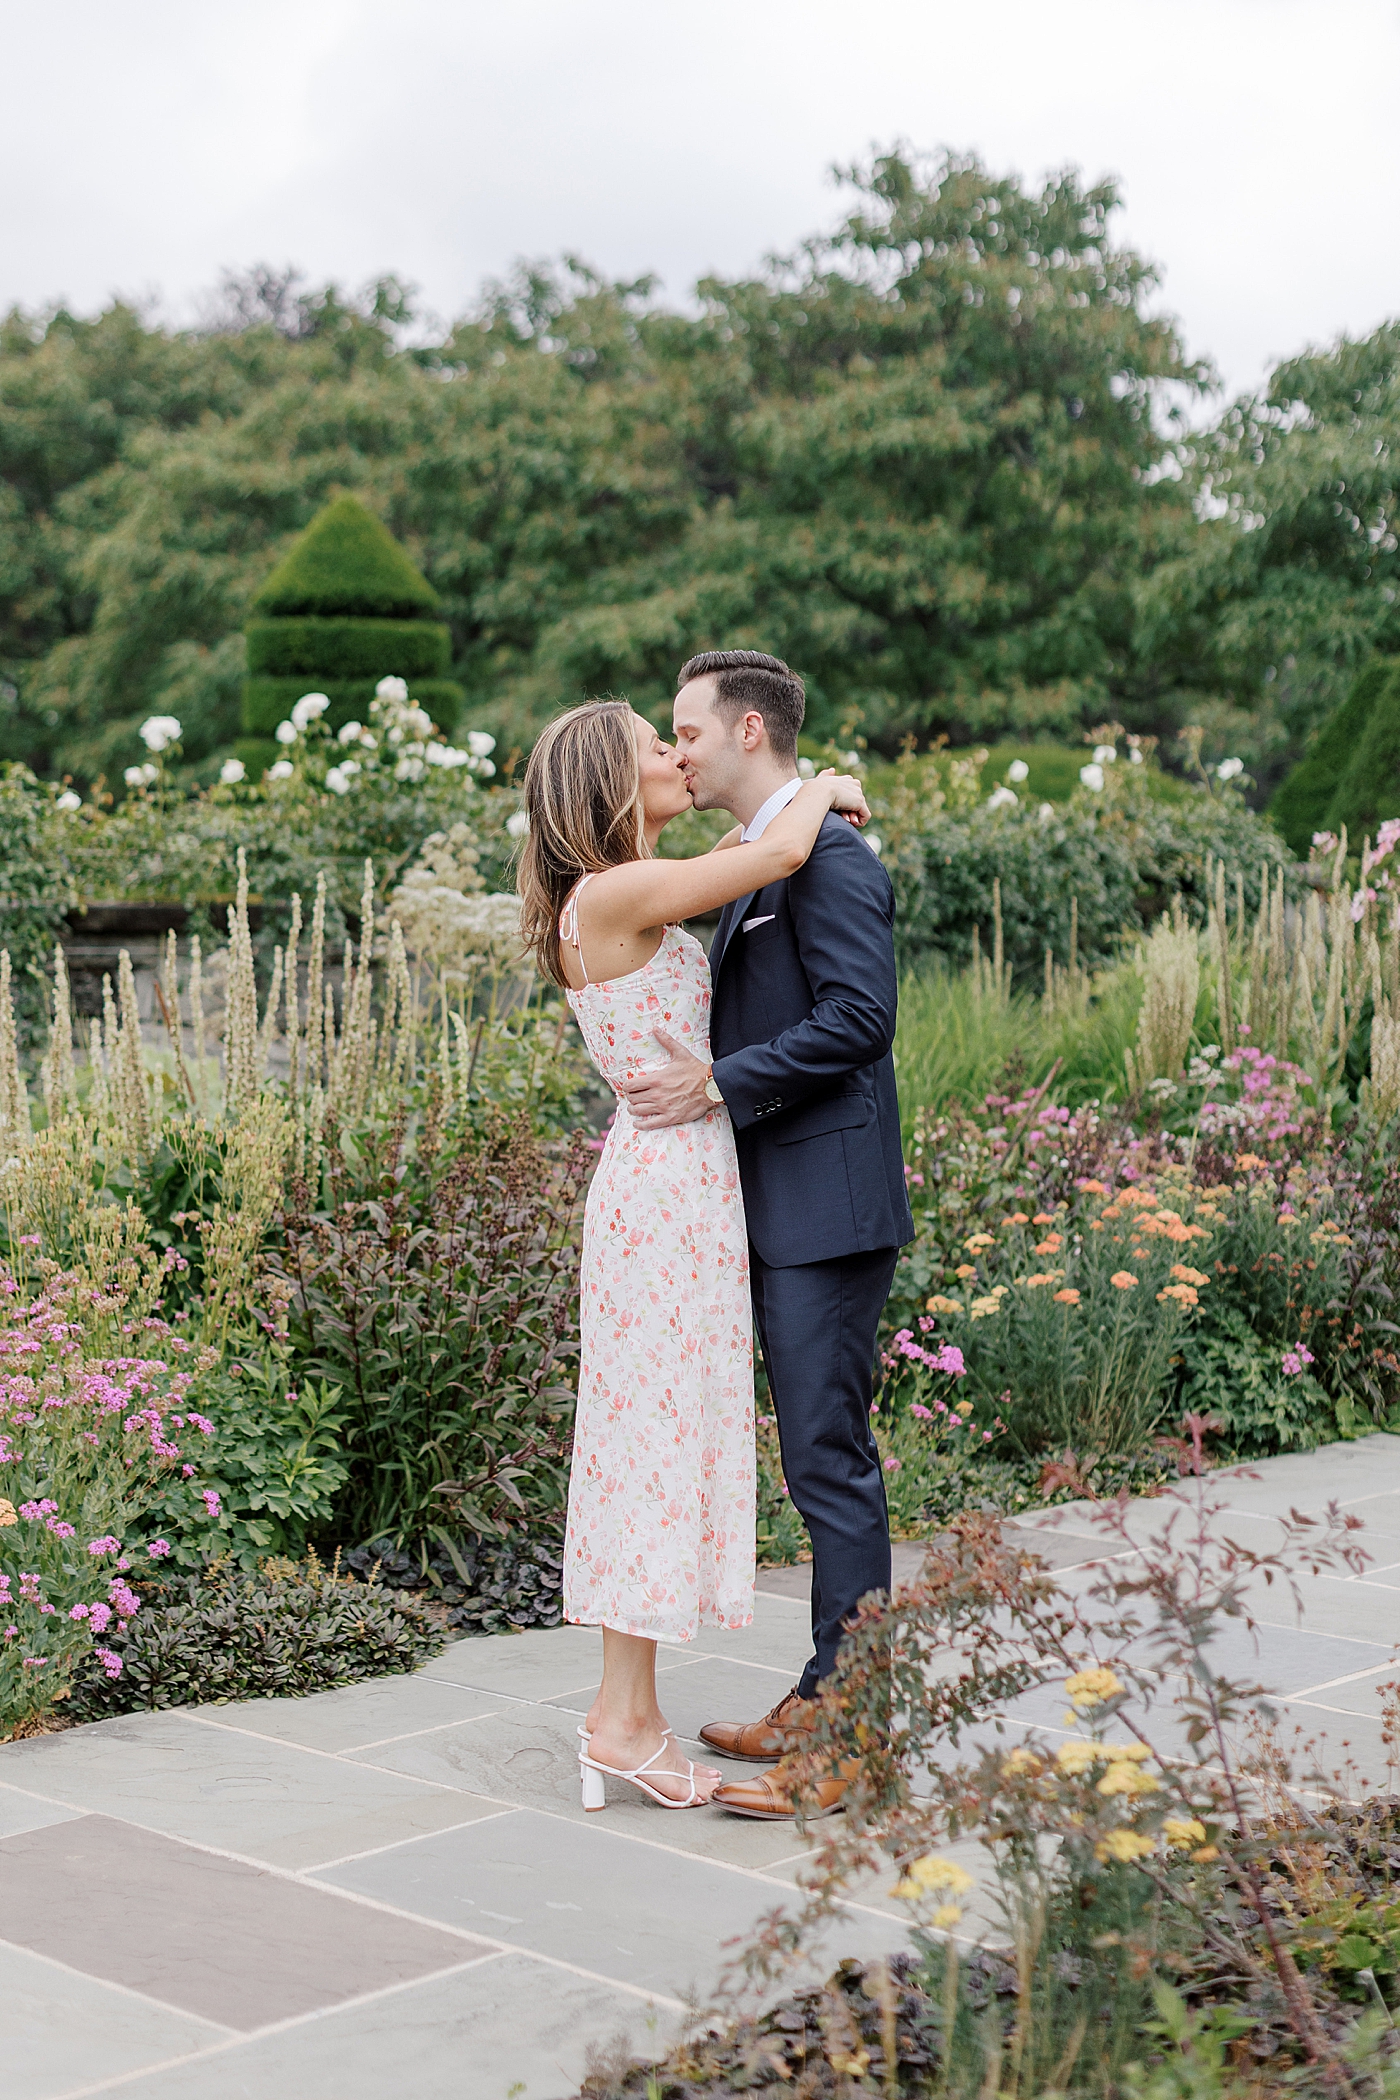 Couple in formal attire kissing in a park | Engagement Session Guides by Hope Helmuth Photography